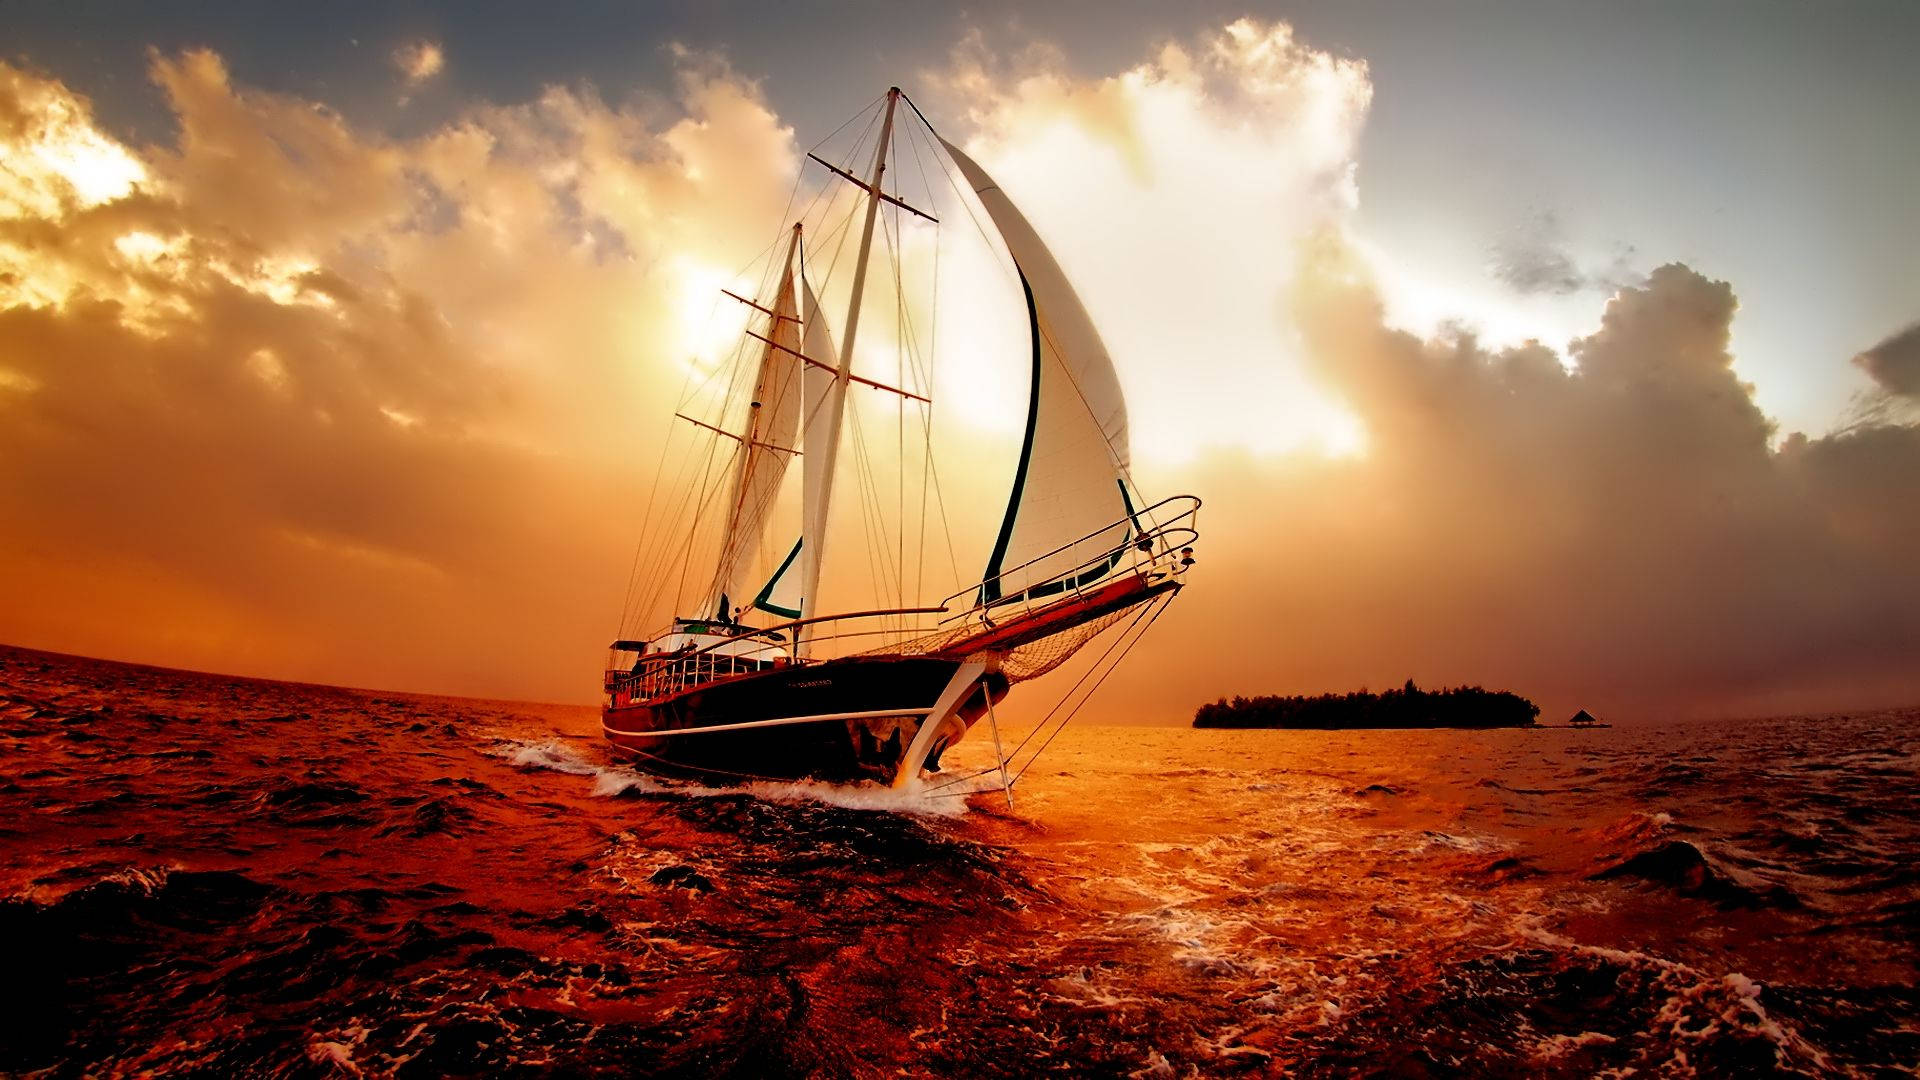 Hd Ship In The Sea Sunset Background